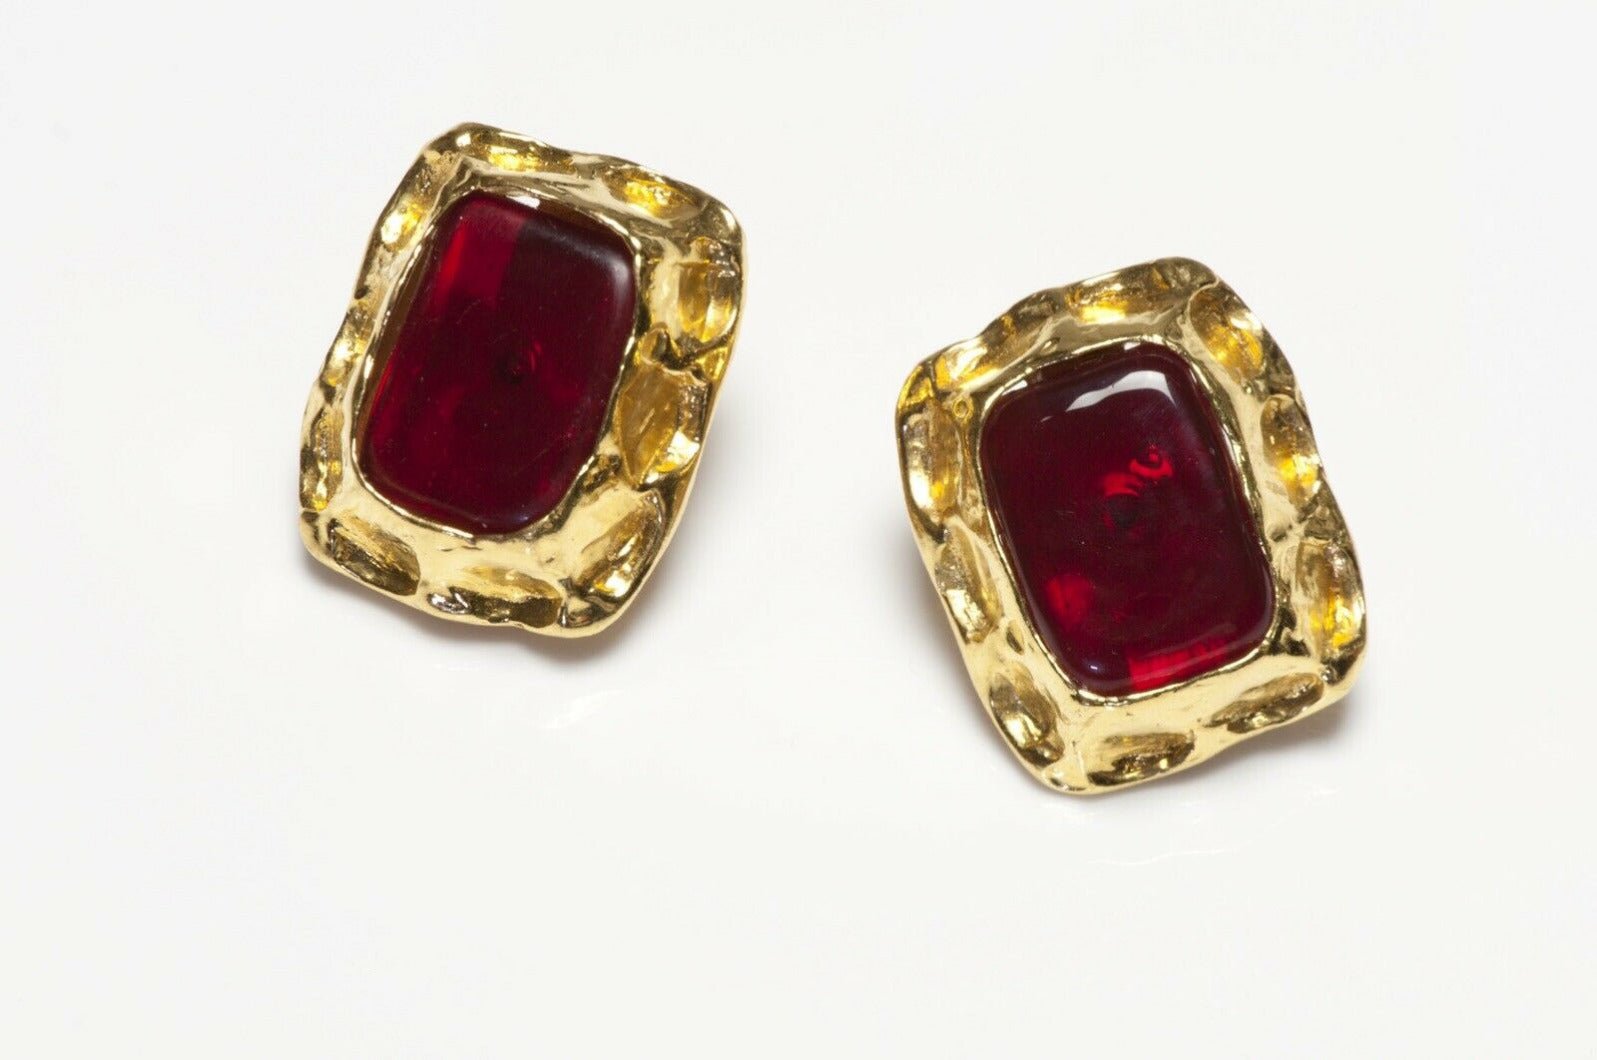 CHANEL Paris 1990’s Maison Gripoix Red Glass Earrings - DSF Antique Jewelry